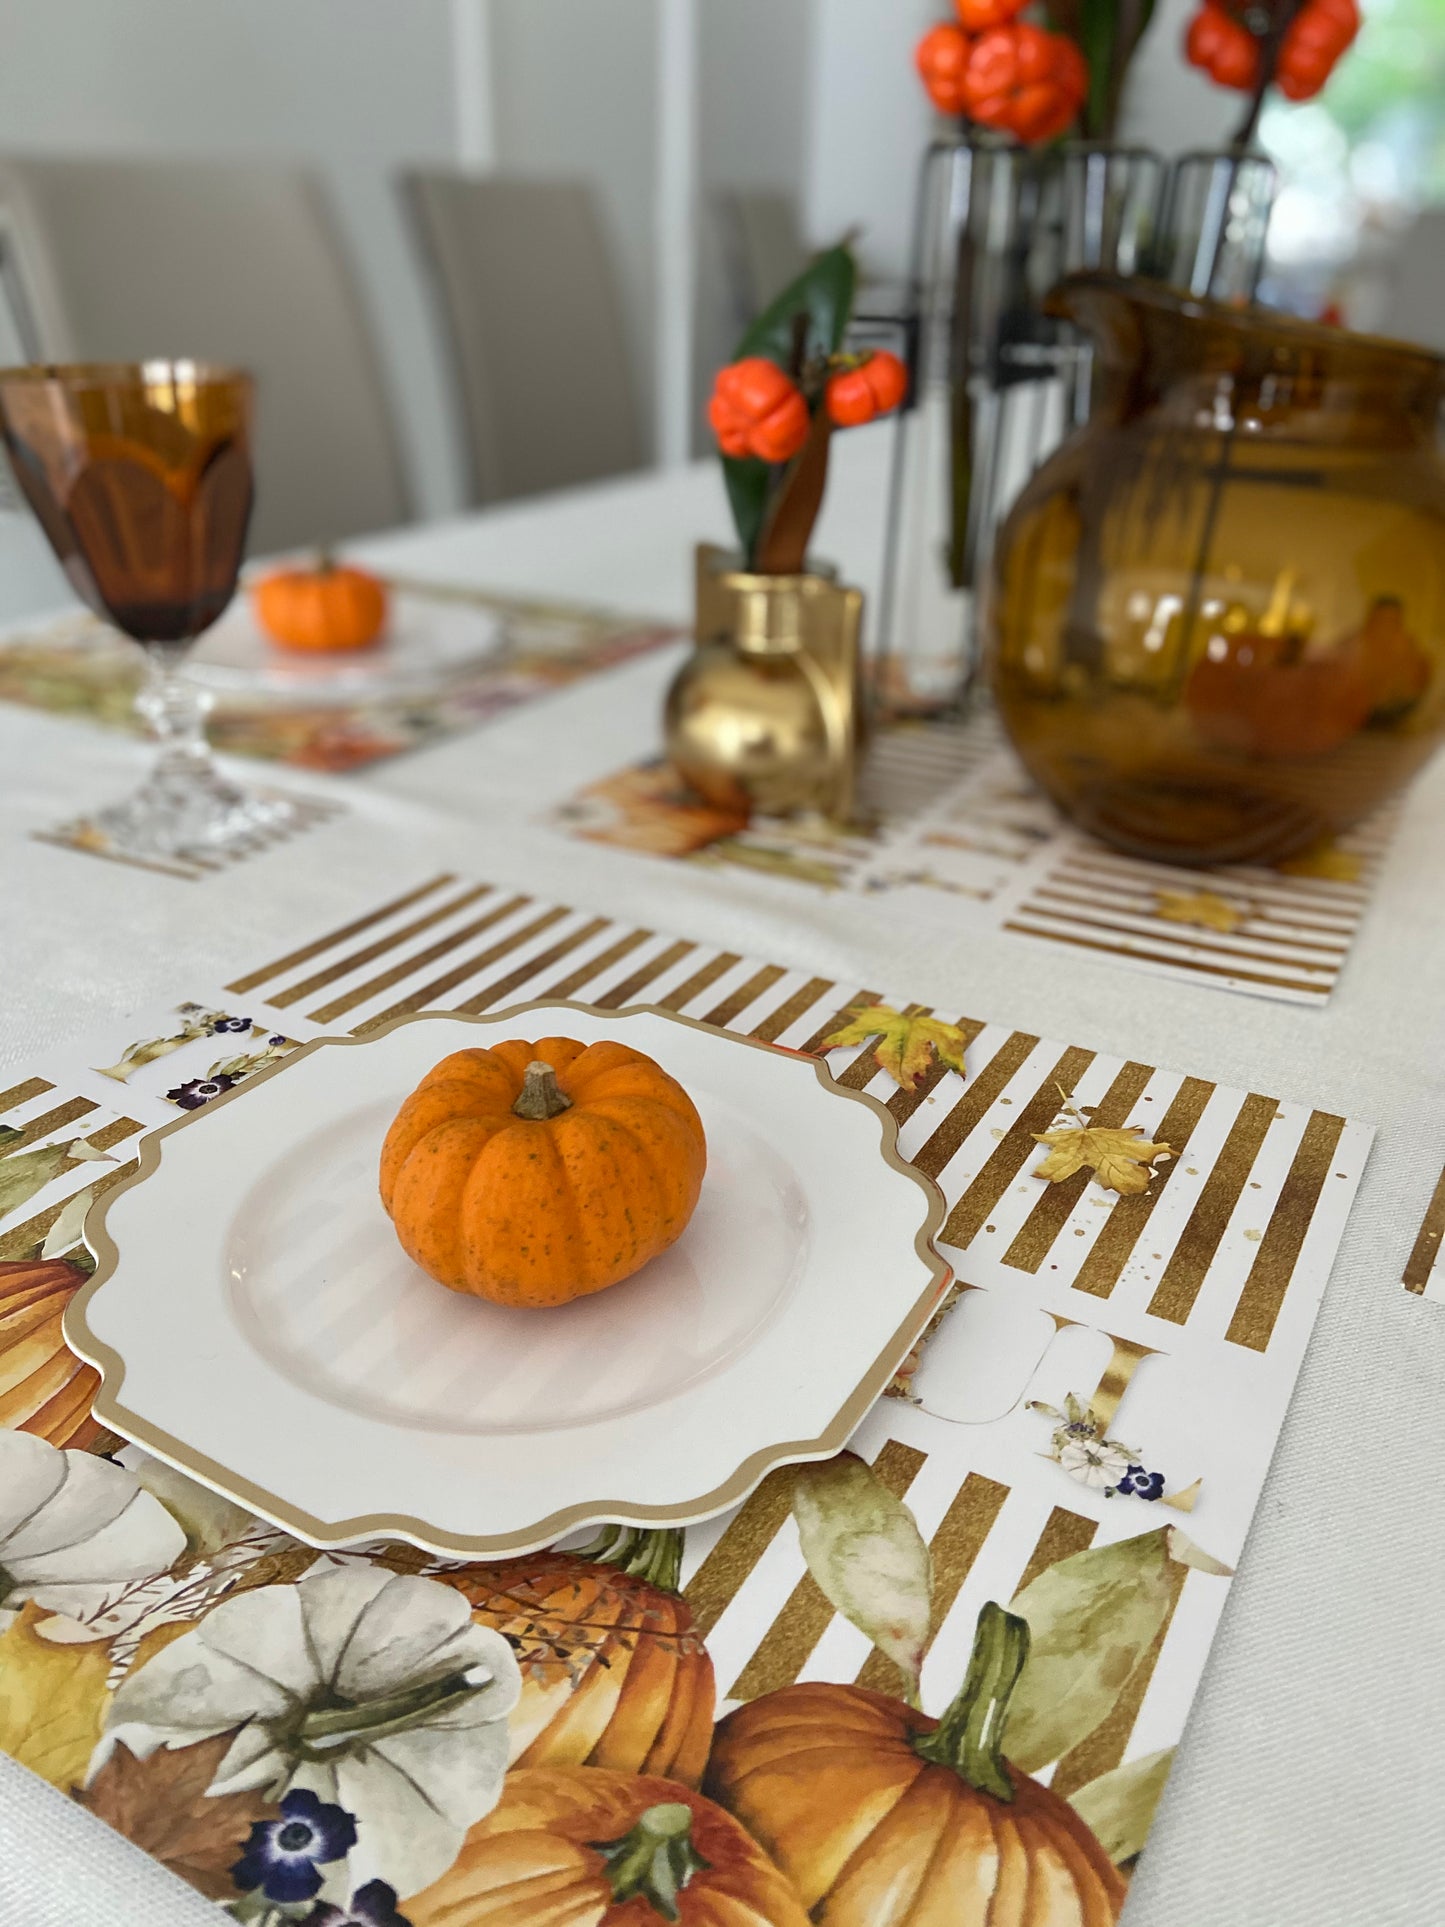 THANKFUL PAPER PLACEMAT